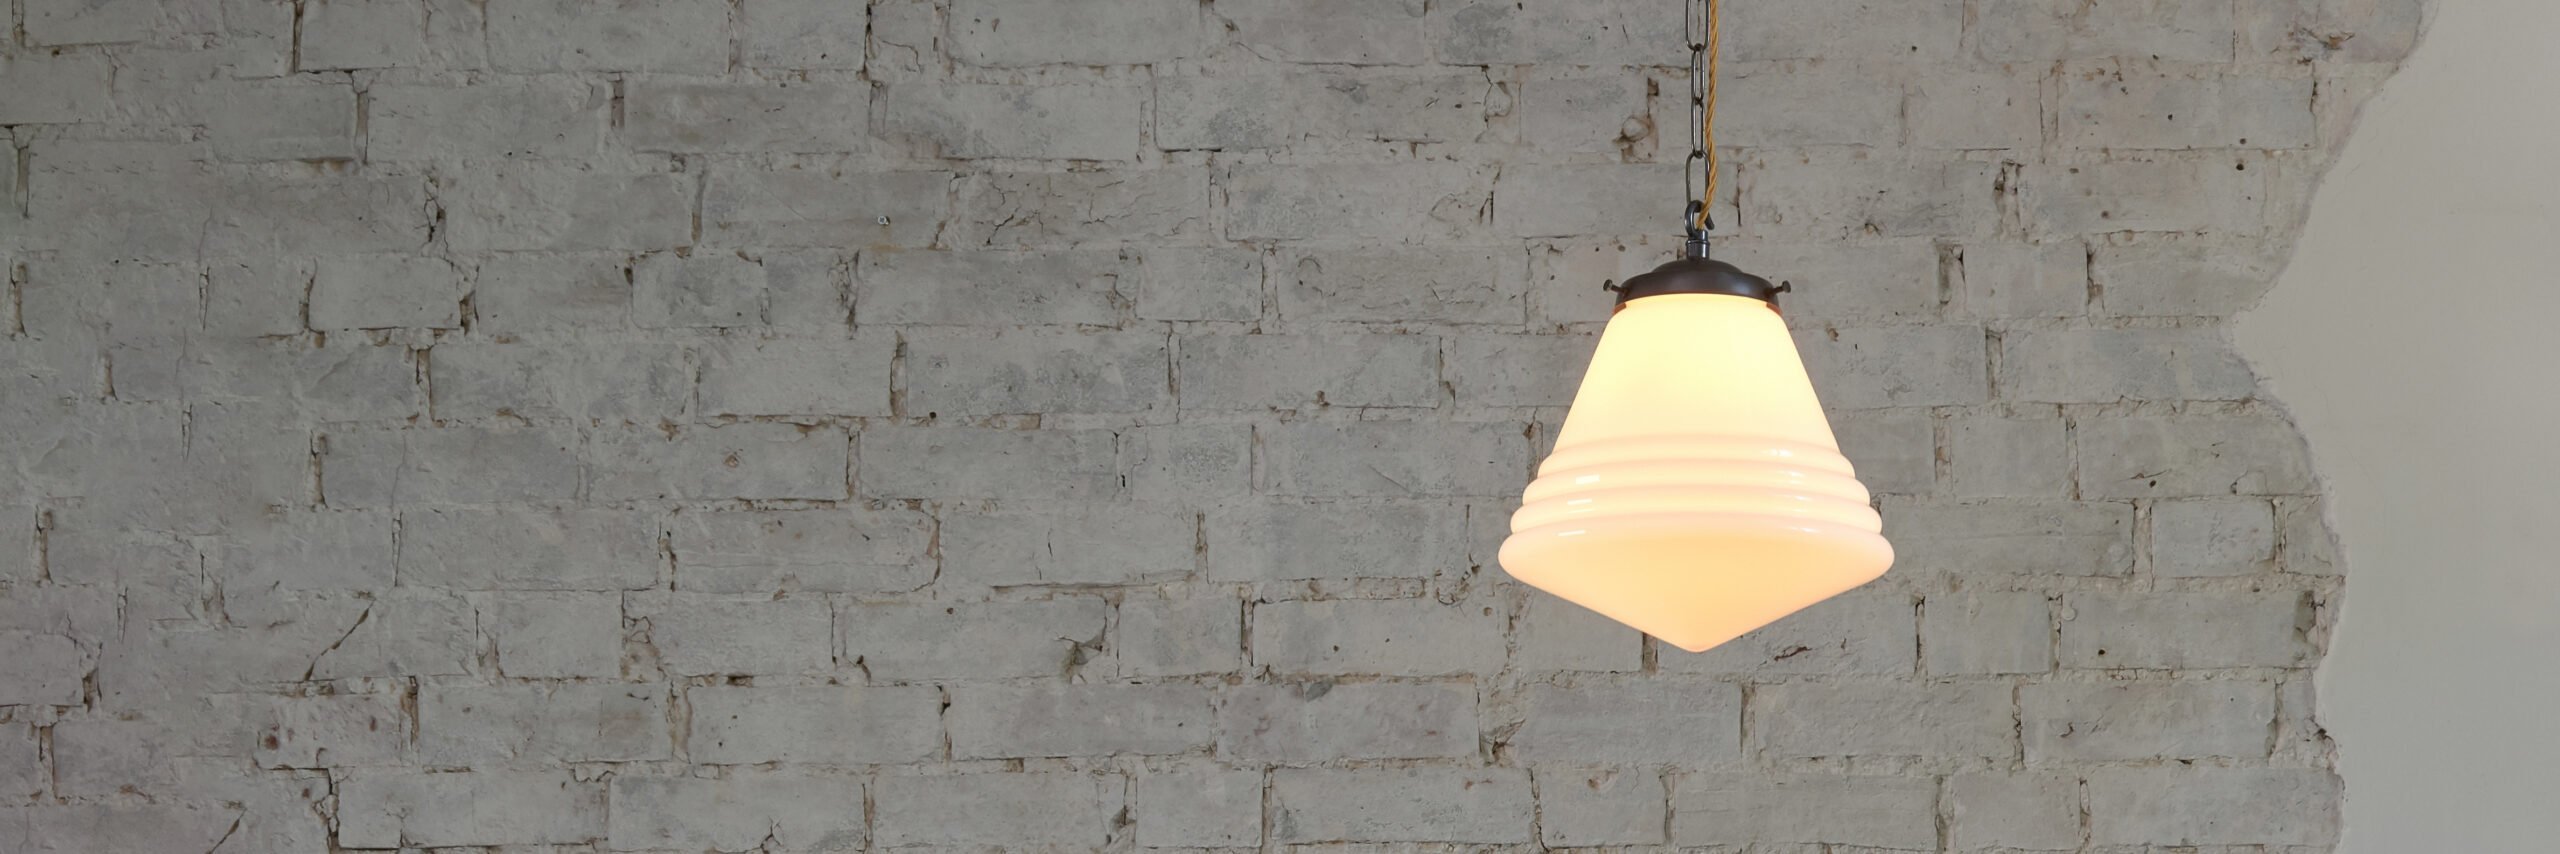 Retro lights against a white brick wall. A perfect lighting addition both for residential or commercial spaces.